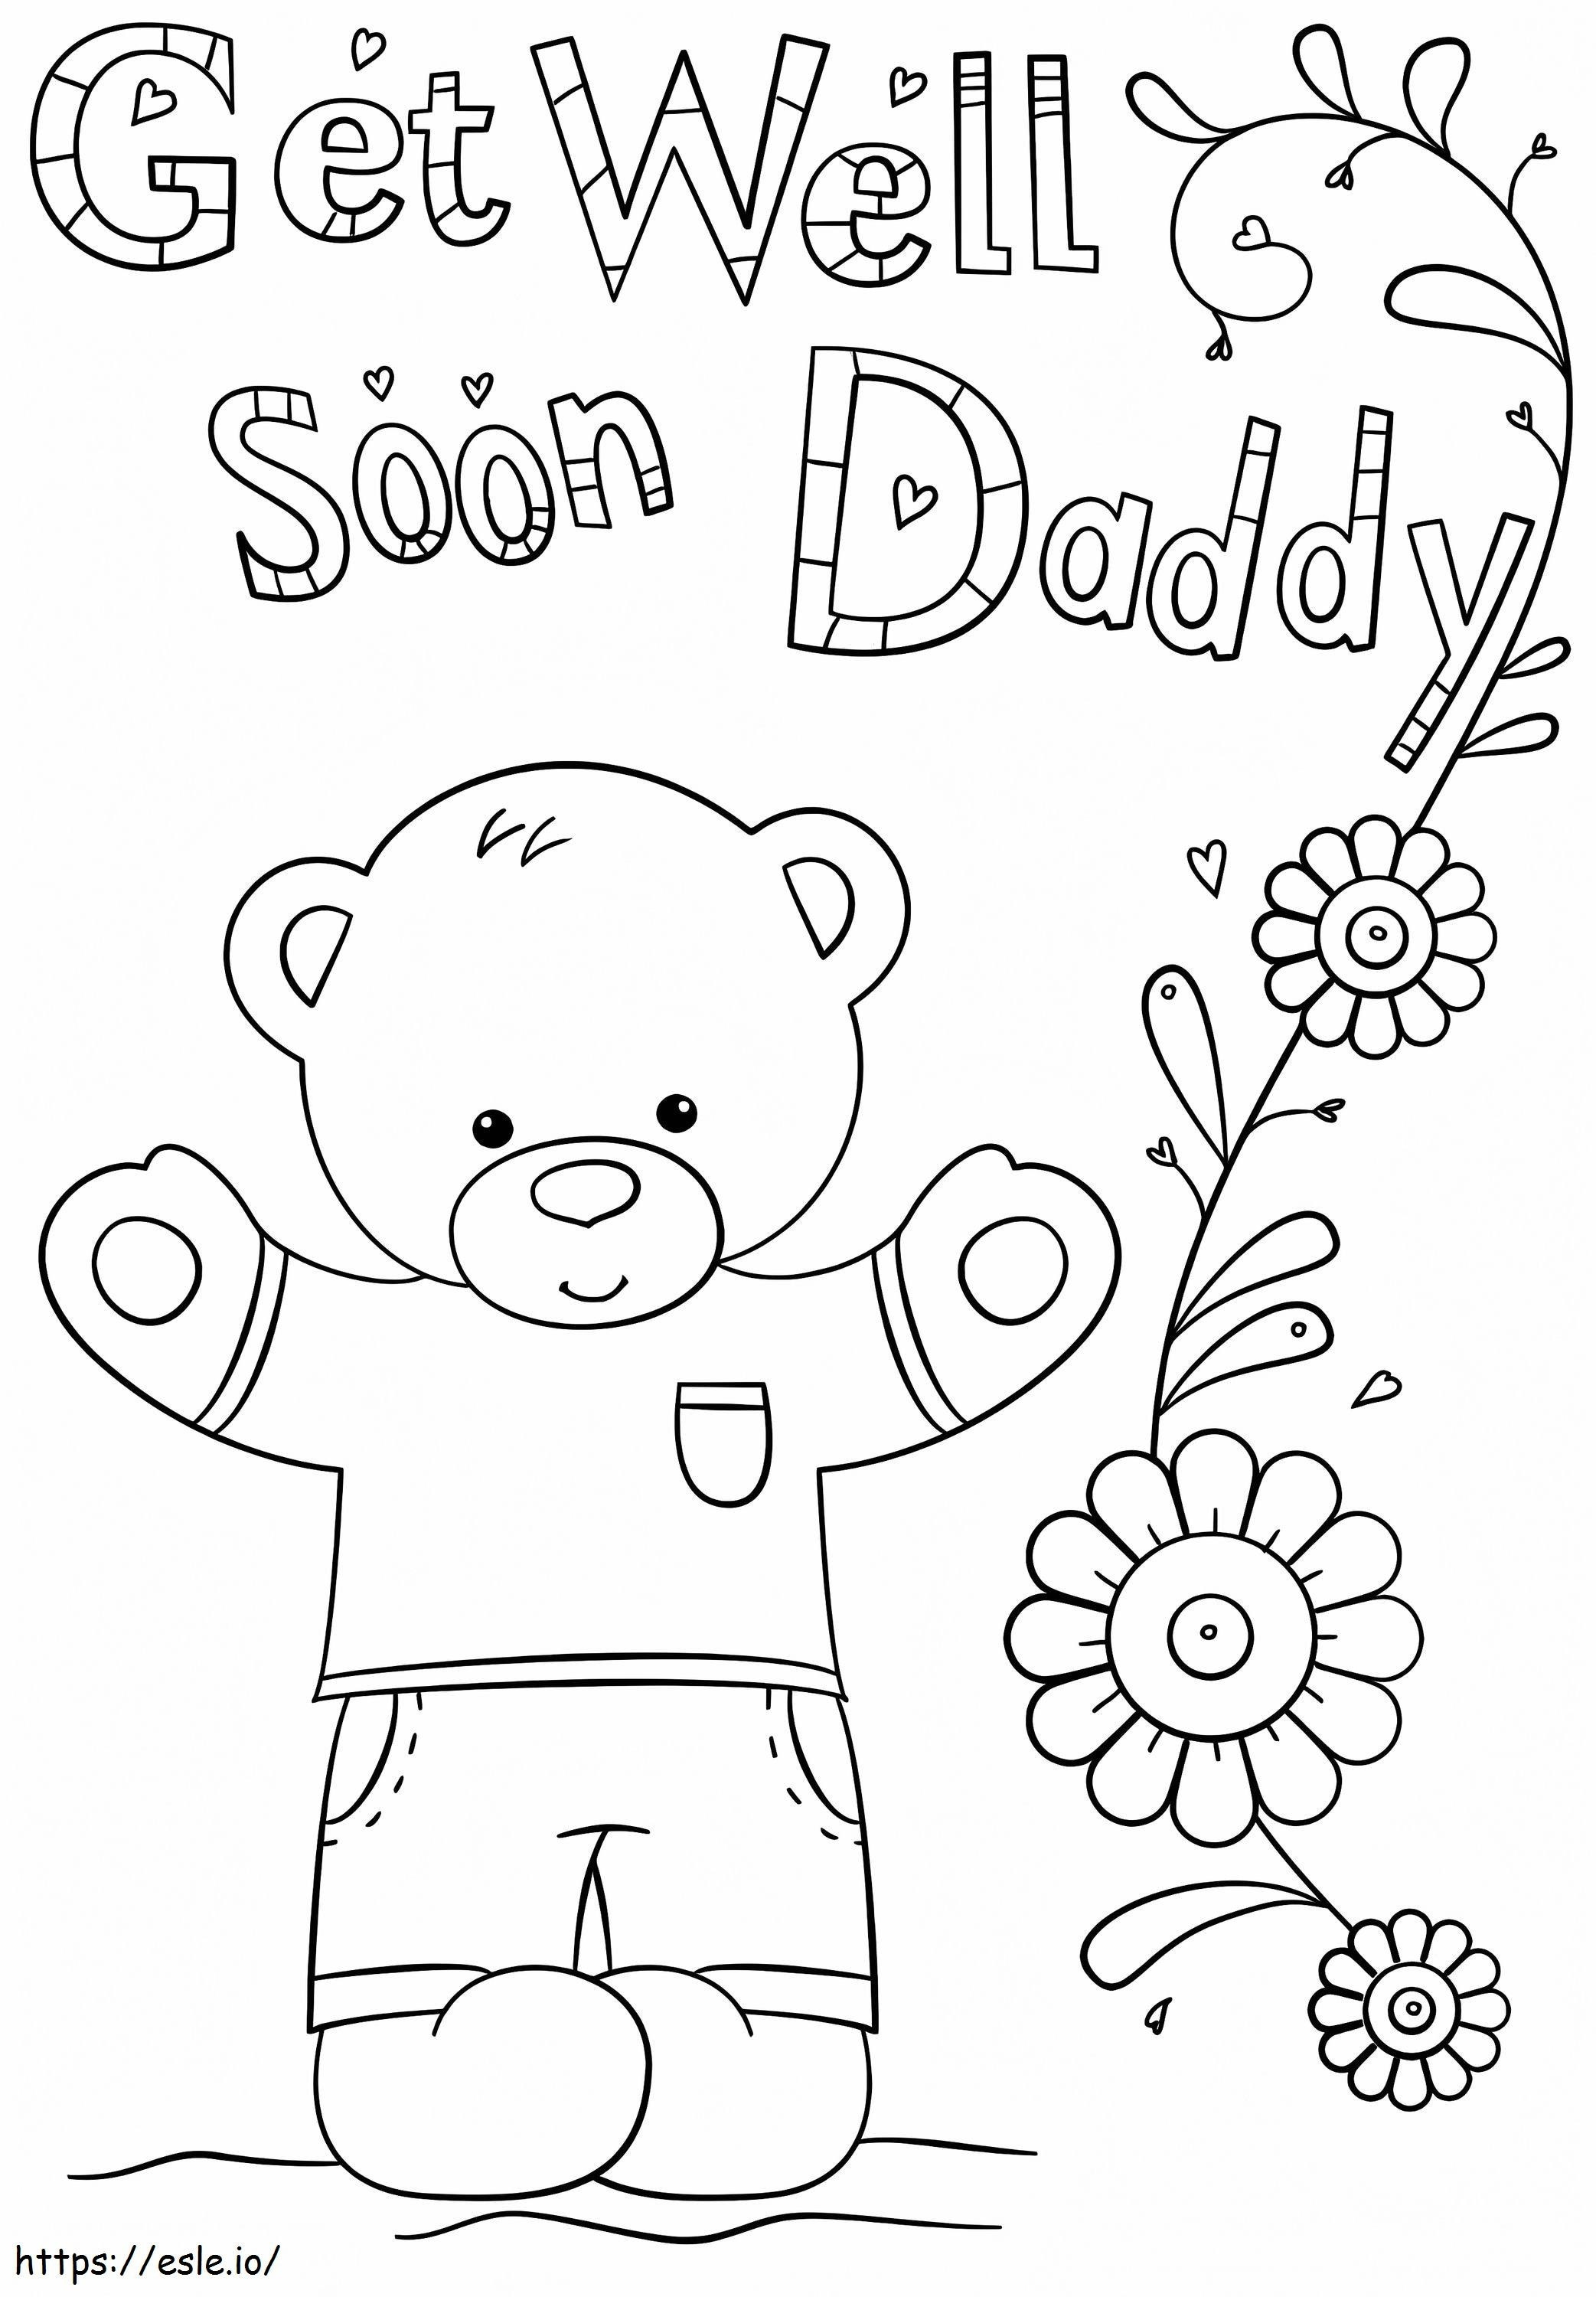 Get Well Soon Daddy coloring page